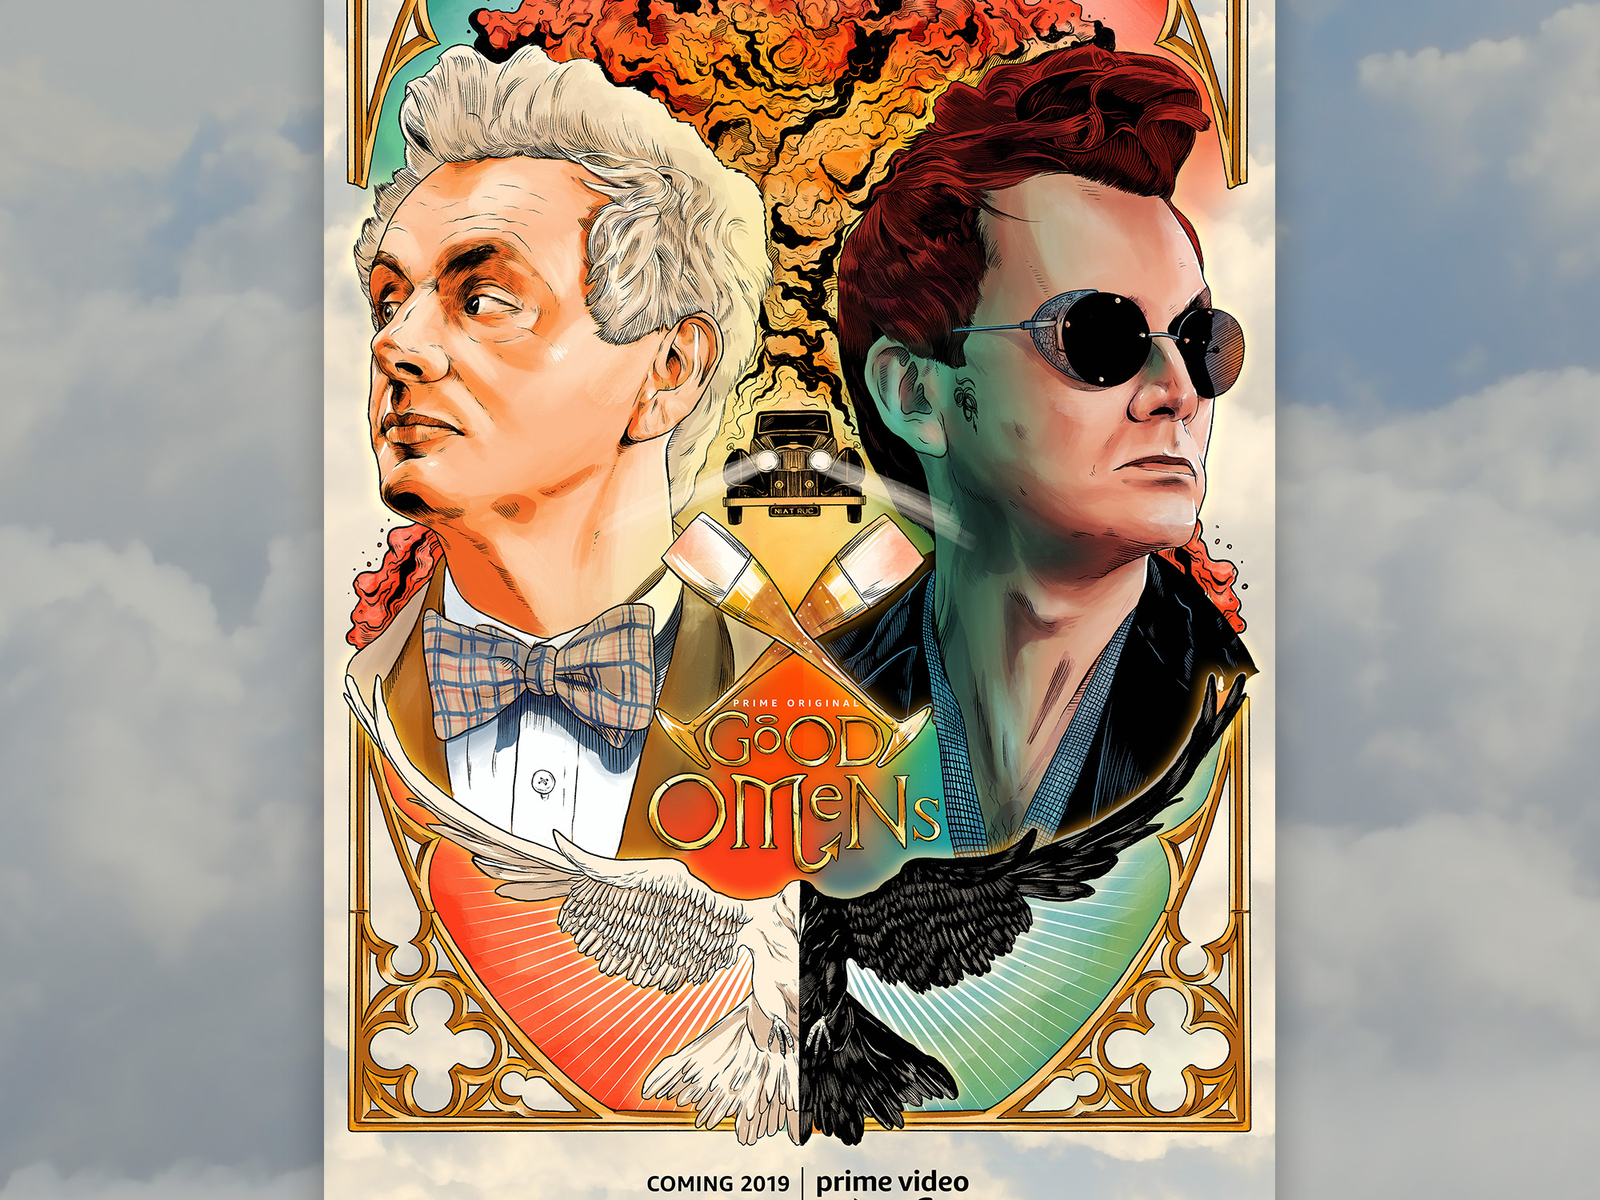 Good Omens Poster 2 By The Commas On Dribbble 8235